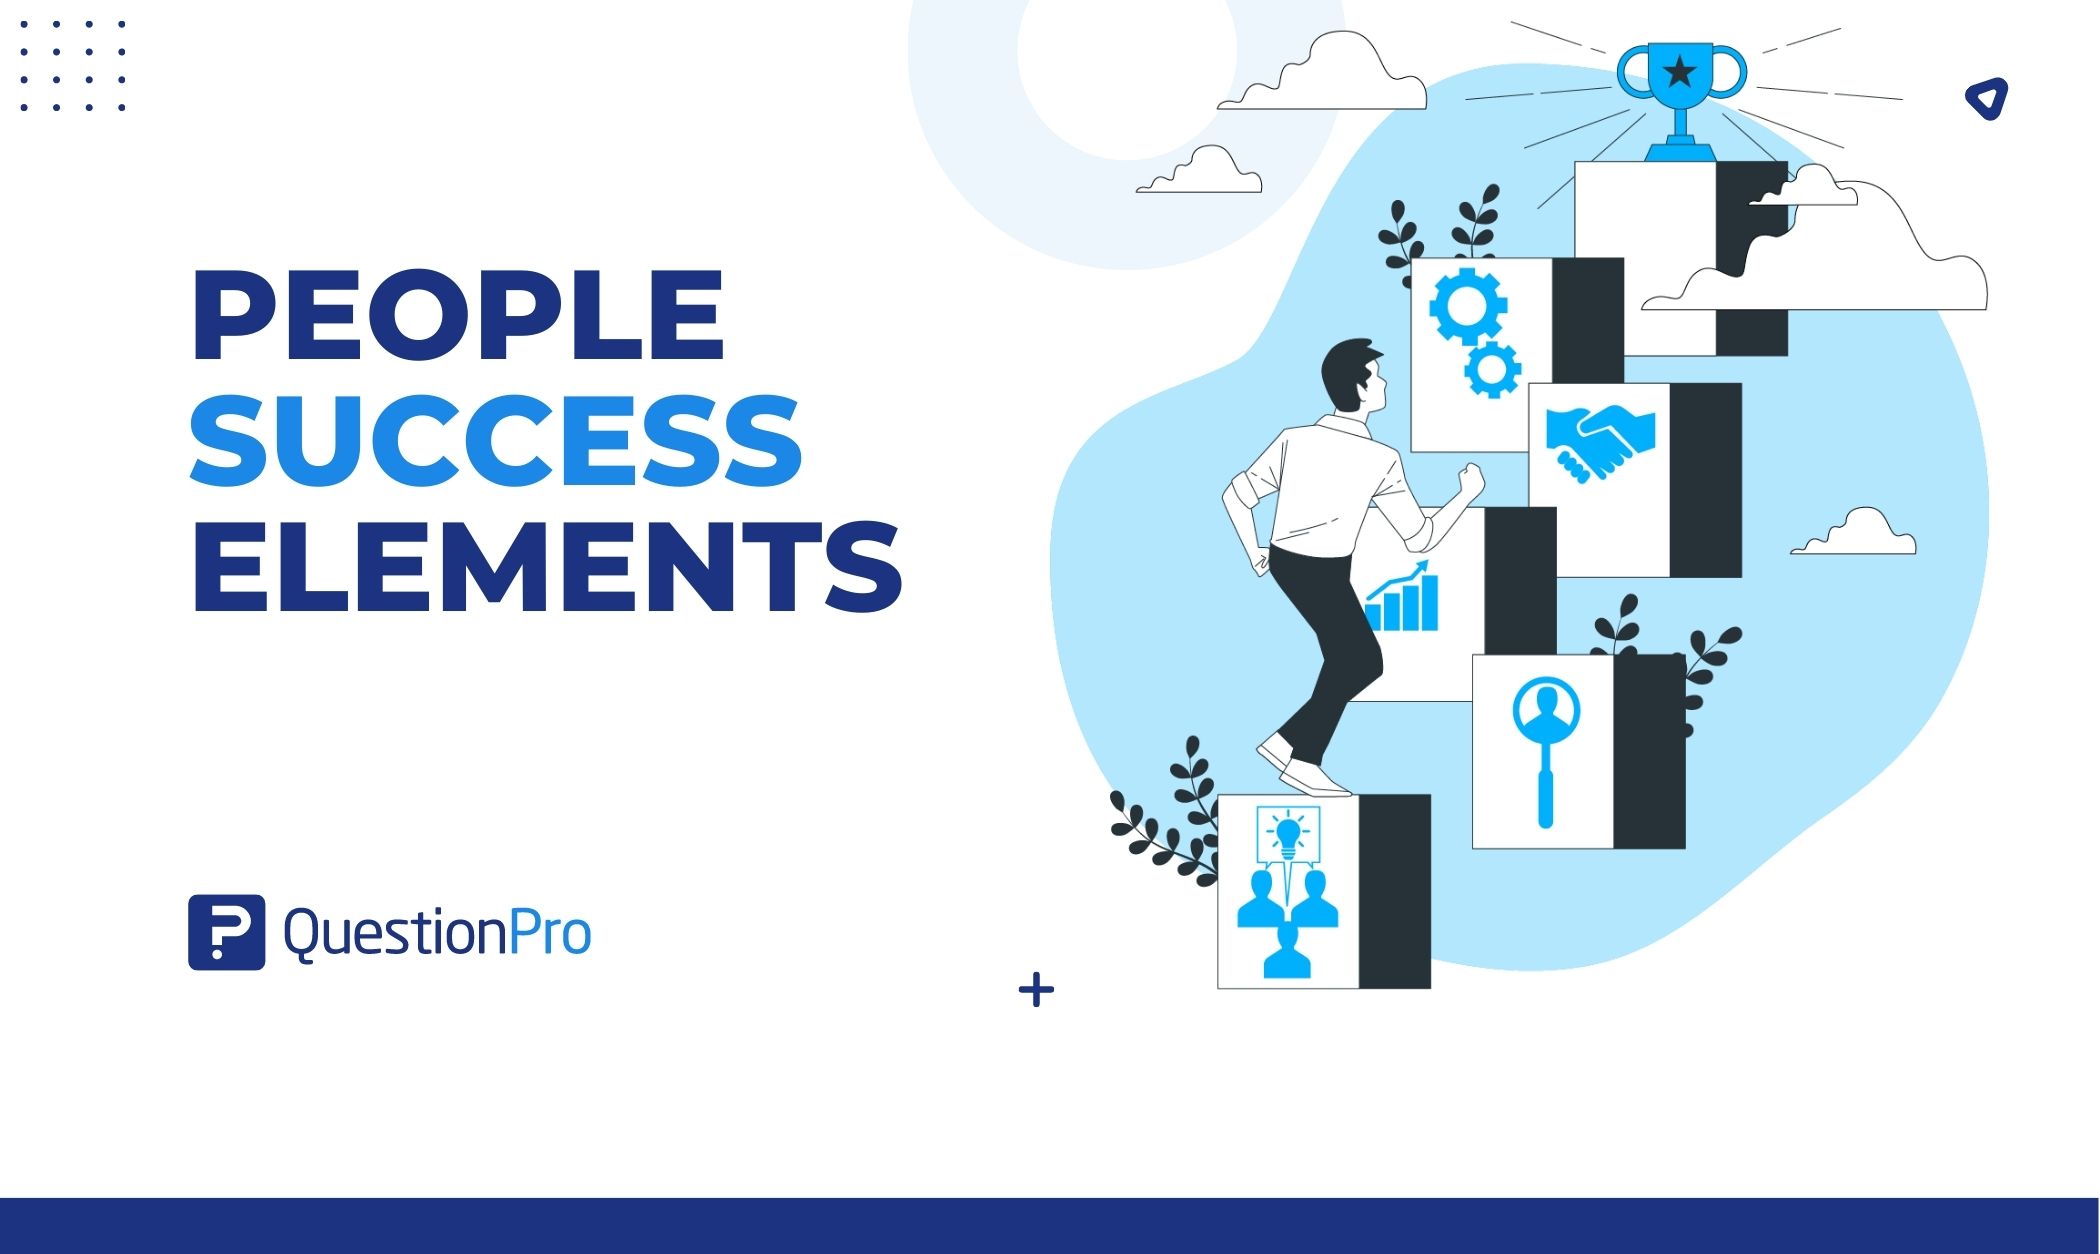 Discover the importance of employee growth and drive long-term growth and stay competitive with people success elements. Learn more.